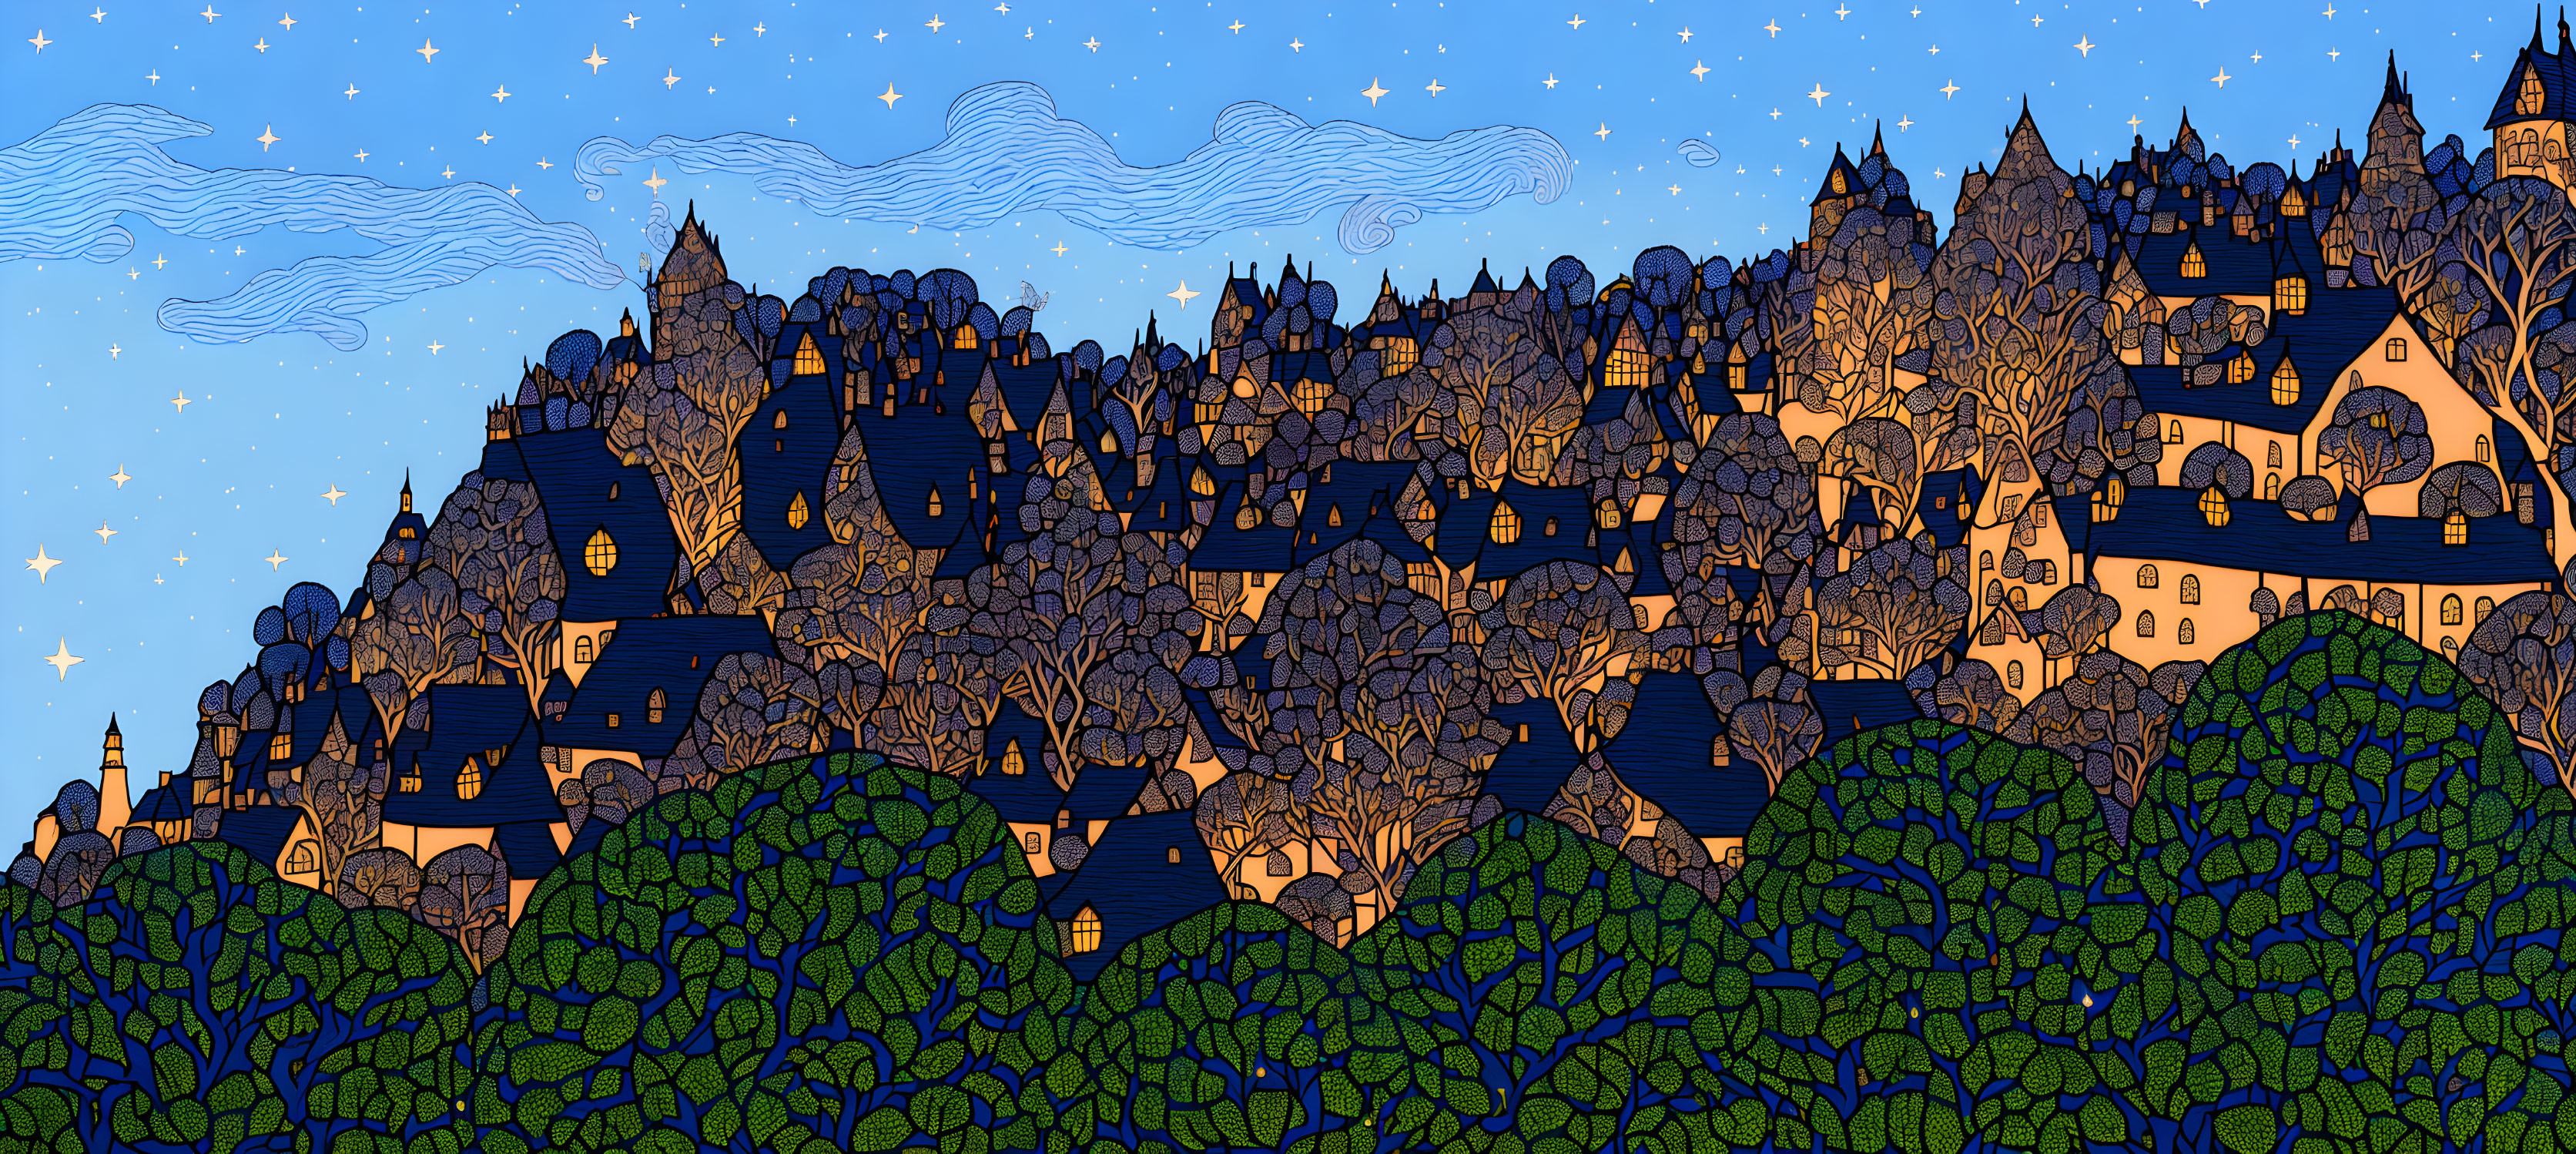 Starry night scene with clustered village and leafy trees